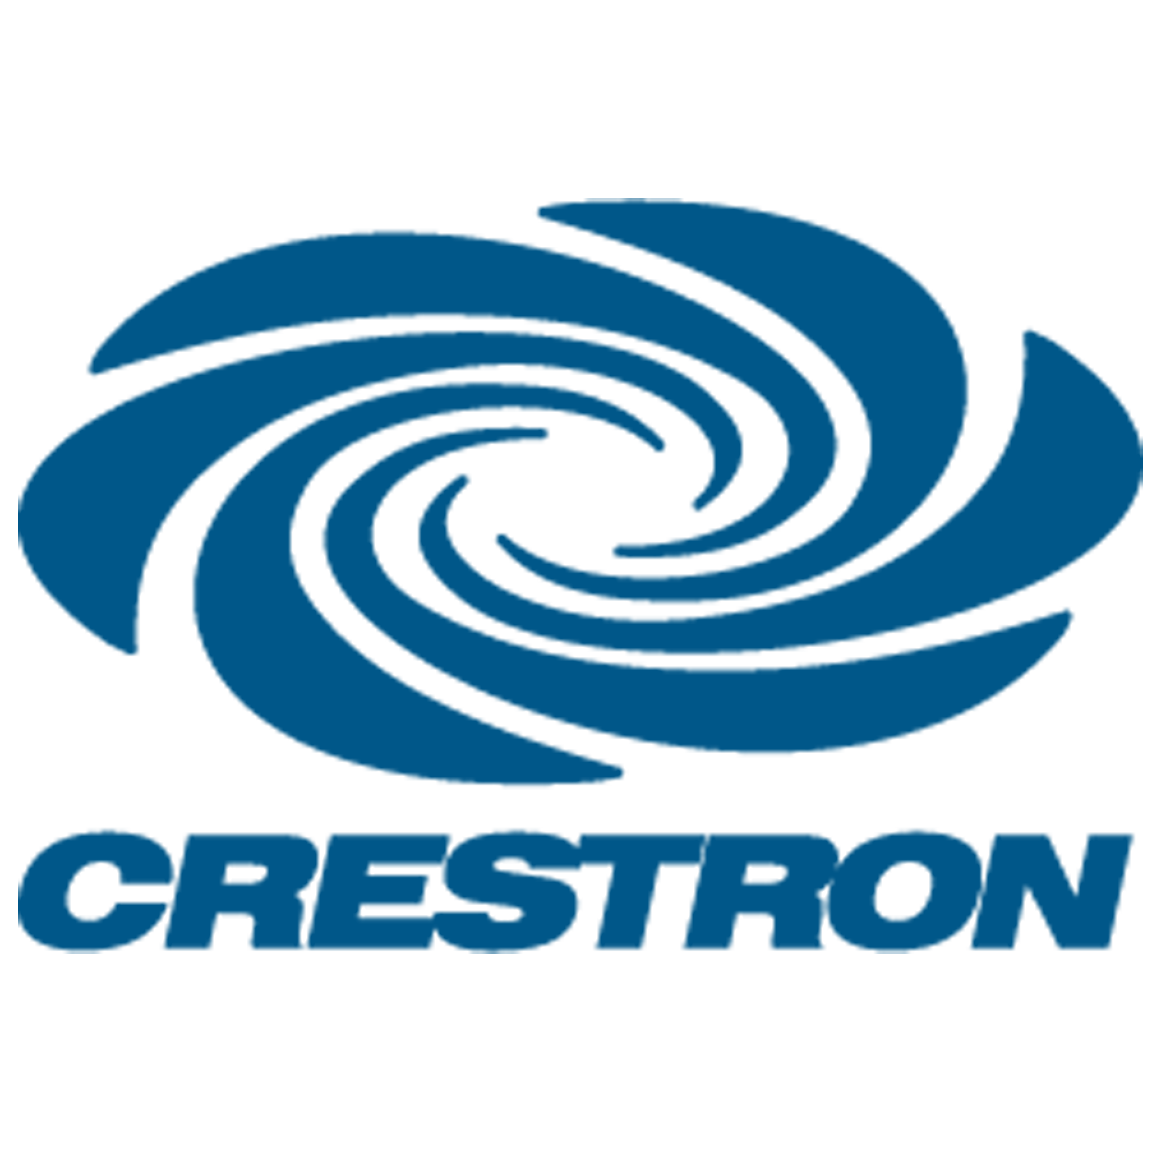 Crestron control systems